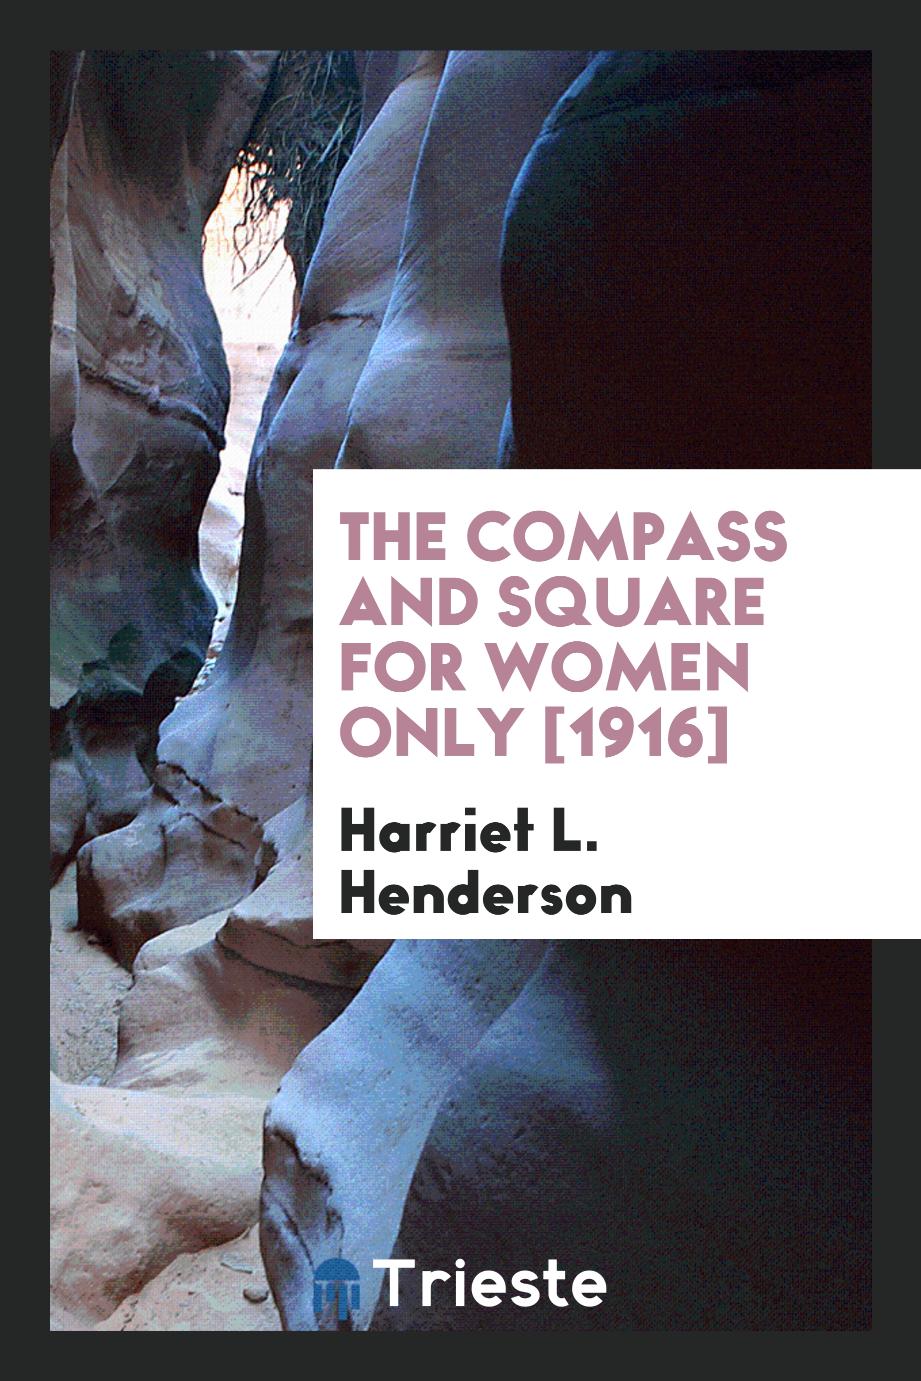 The Compass and Square for Women Only [1916]